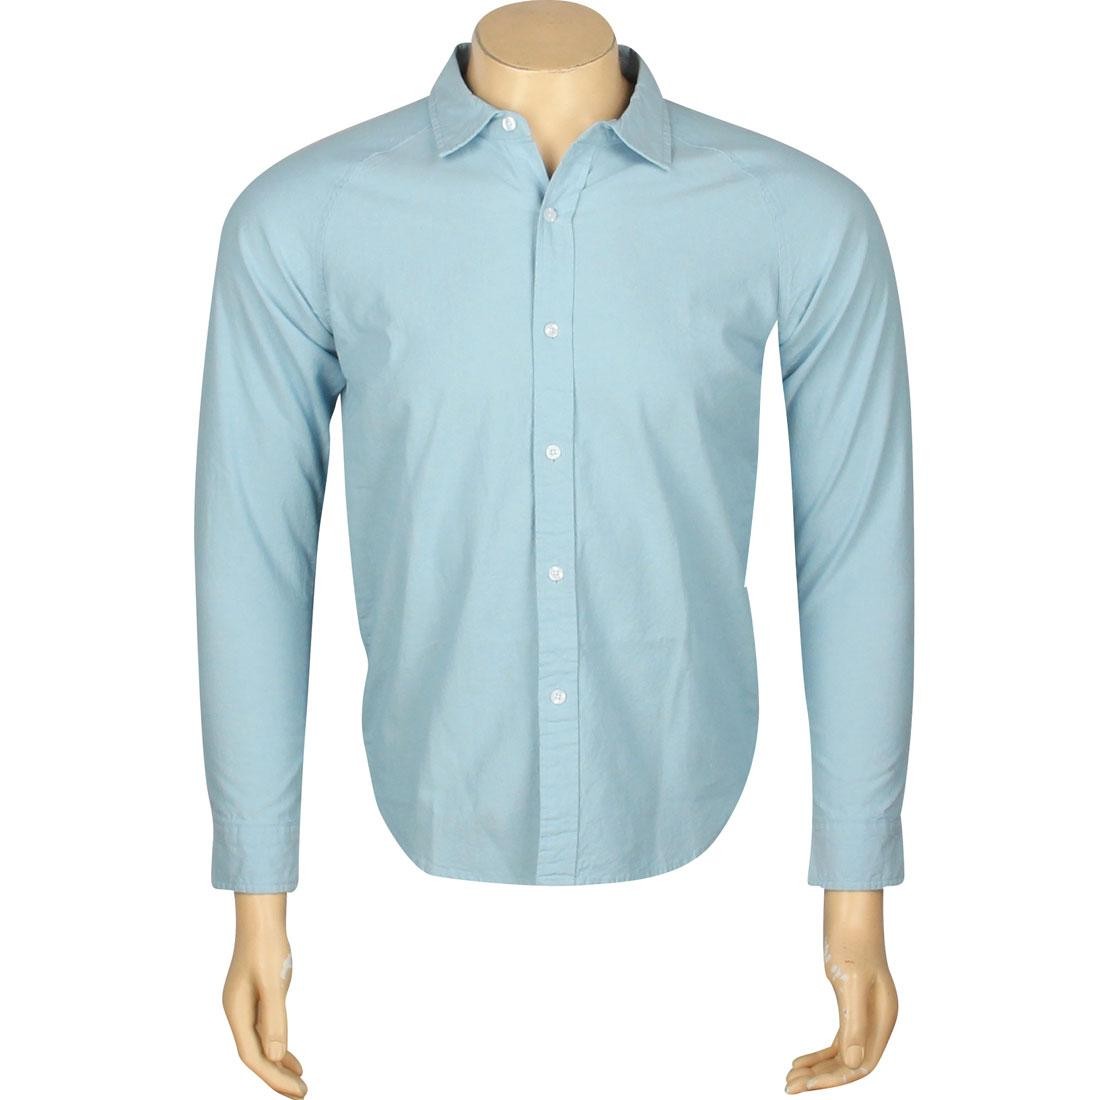 Undefeated Vintage Chambray Long Sleeve shirt Zip (blue / light blue)